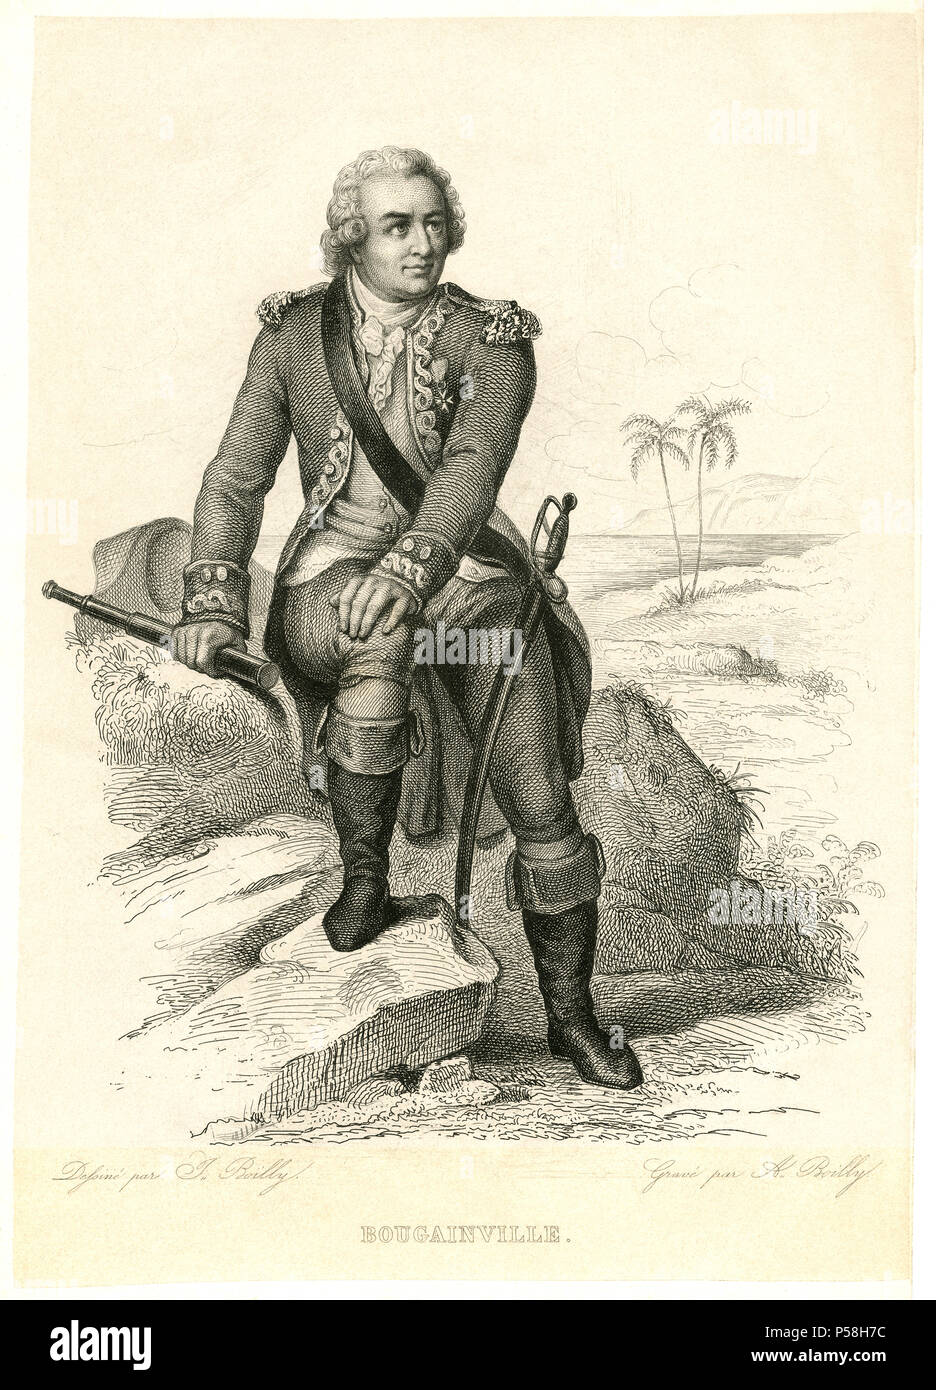 Louis Antoine de Bougainville (1729-1811), French Admiral and Explorer, Full-Length Engraving Stock Photo